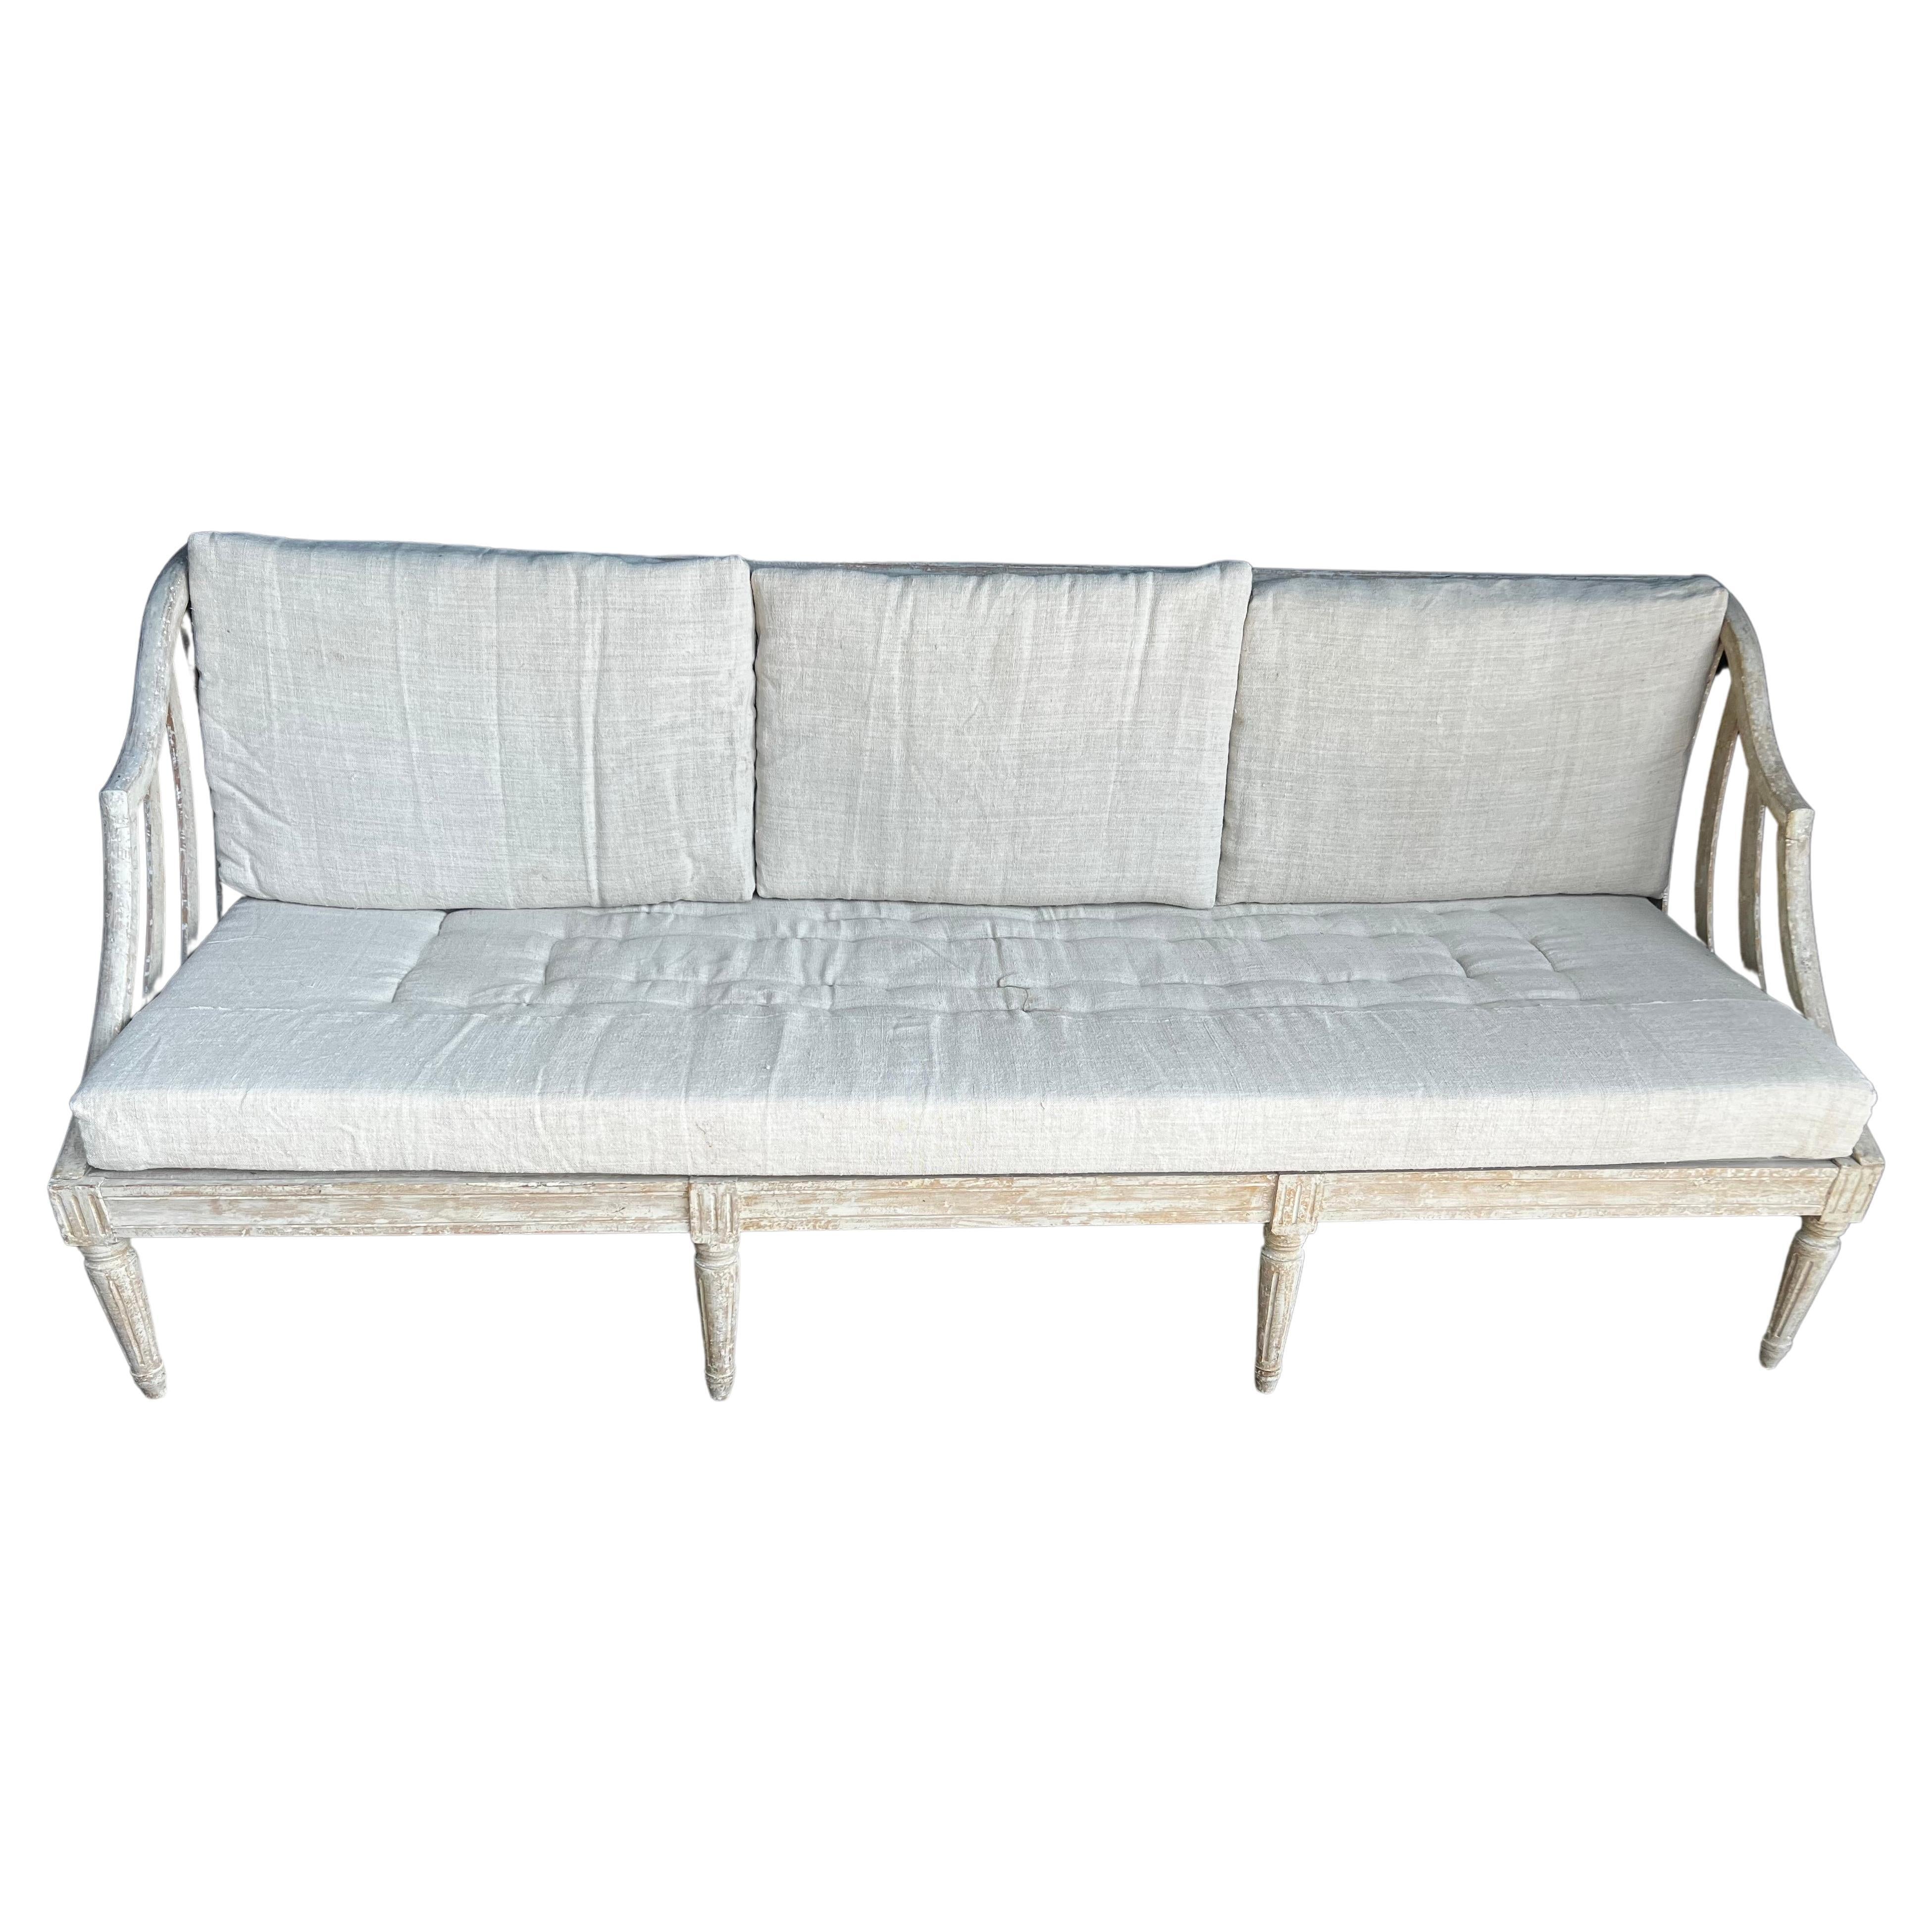 A beautiful, large and very rare large Swedish Gustavian sofa with new upholstered seat cushions added. This piece is very unique and rare with the grande scale and featuring side curved arms. Dry scrapped to the original paint color. This is one of